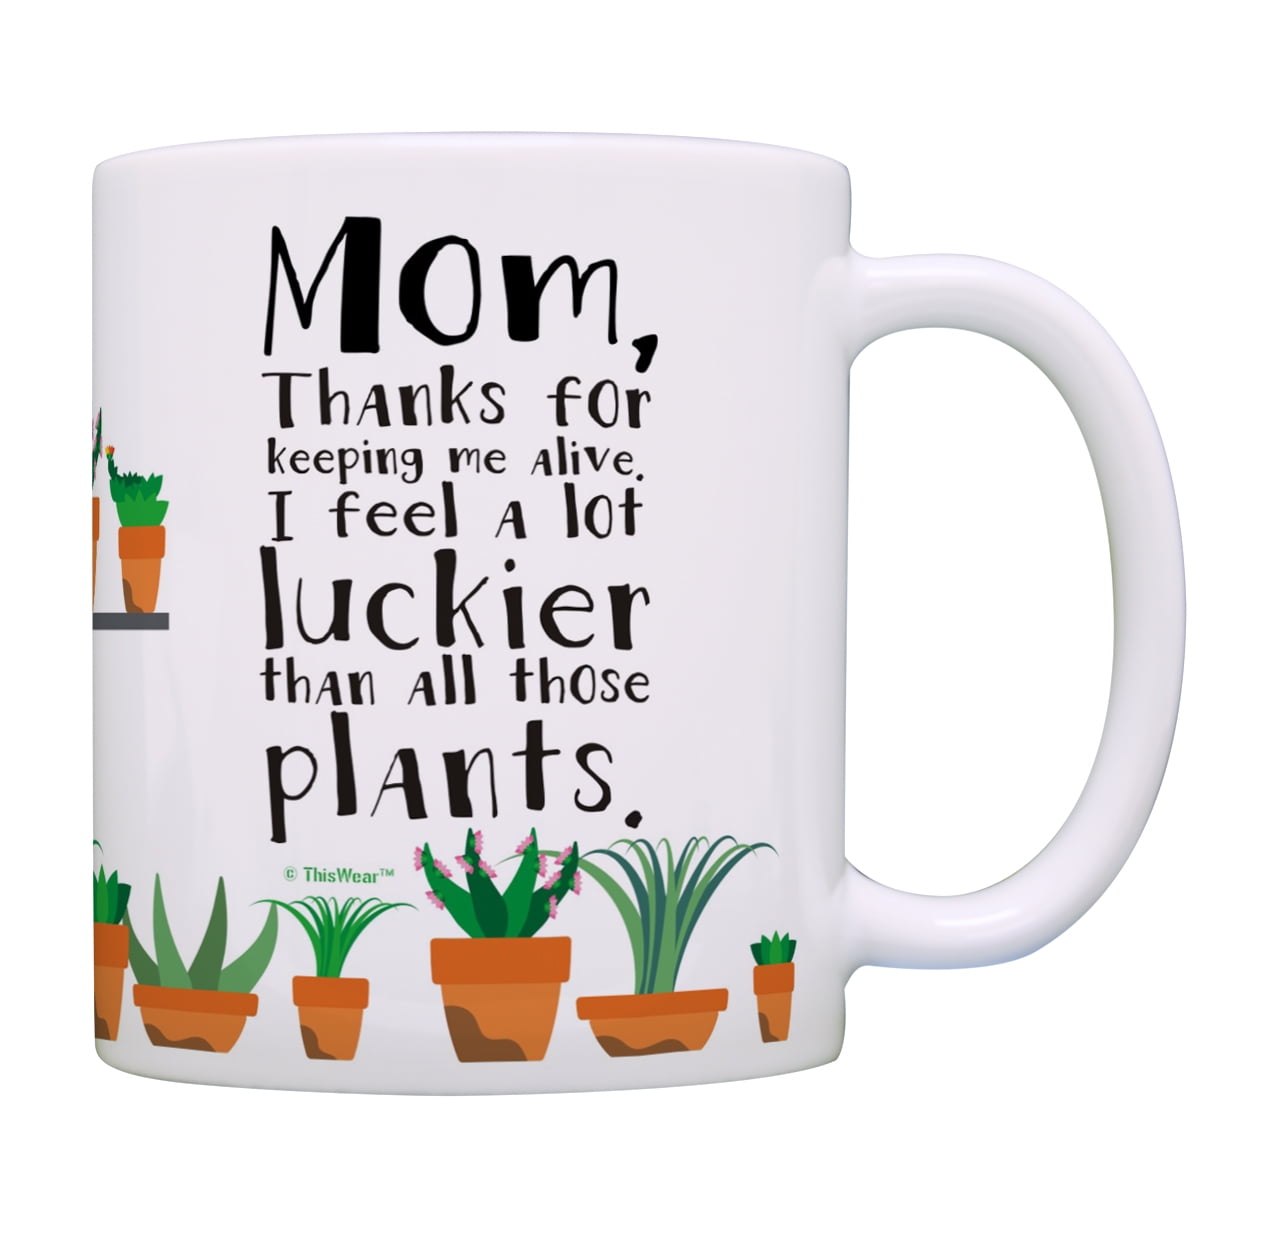 ThisWear Funny Mom Mug Thanks for Keeping Me Alive I Feel a Lot Luckier  Than All Those Plants Best Mom Gifts Mom Appreciation Gifts Mom Coffee Cup  Gifts for Moms Birthday 11